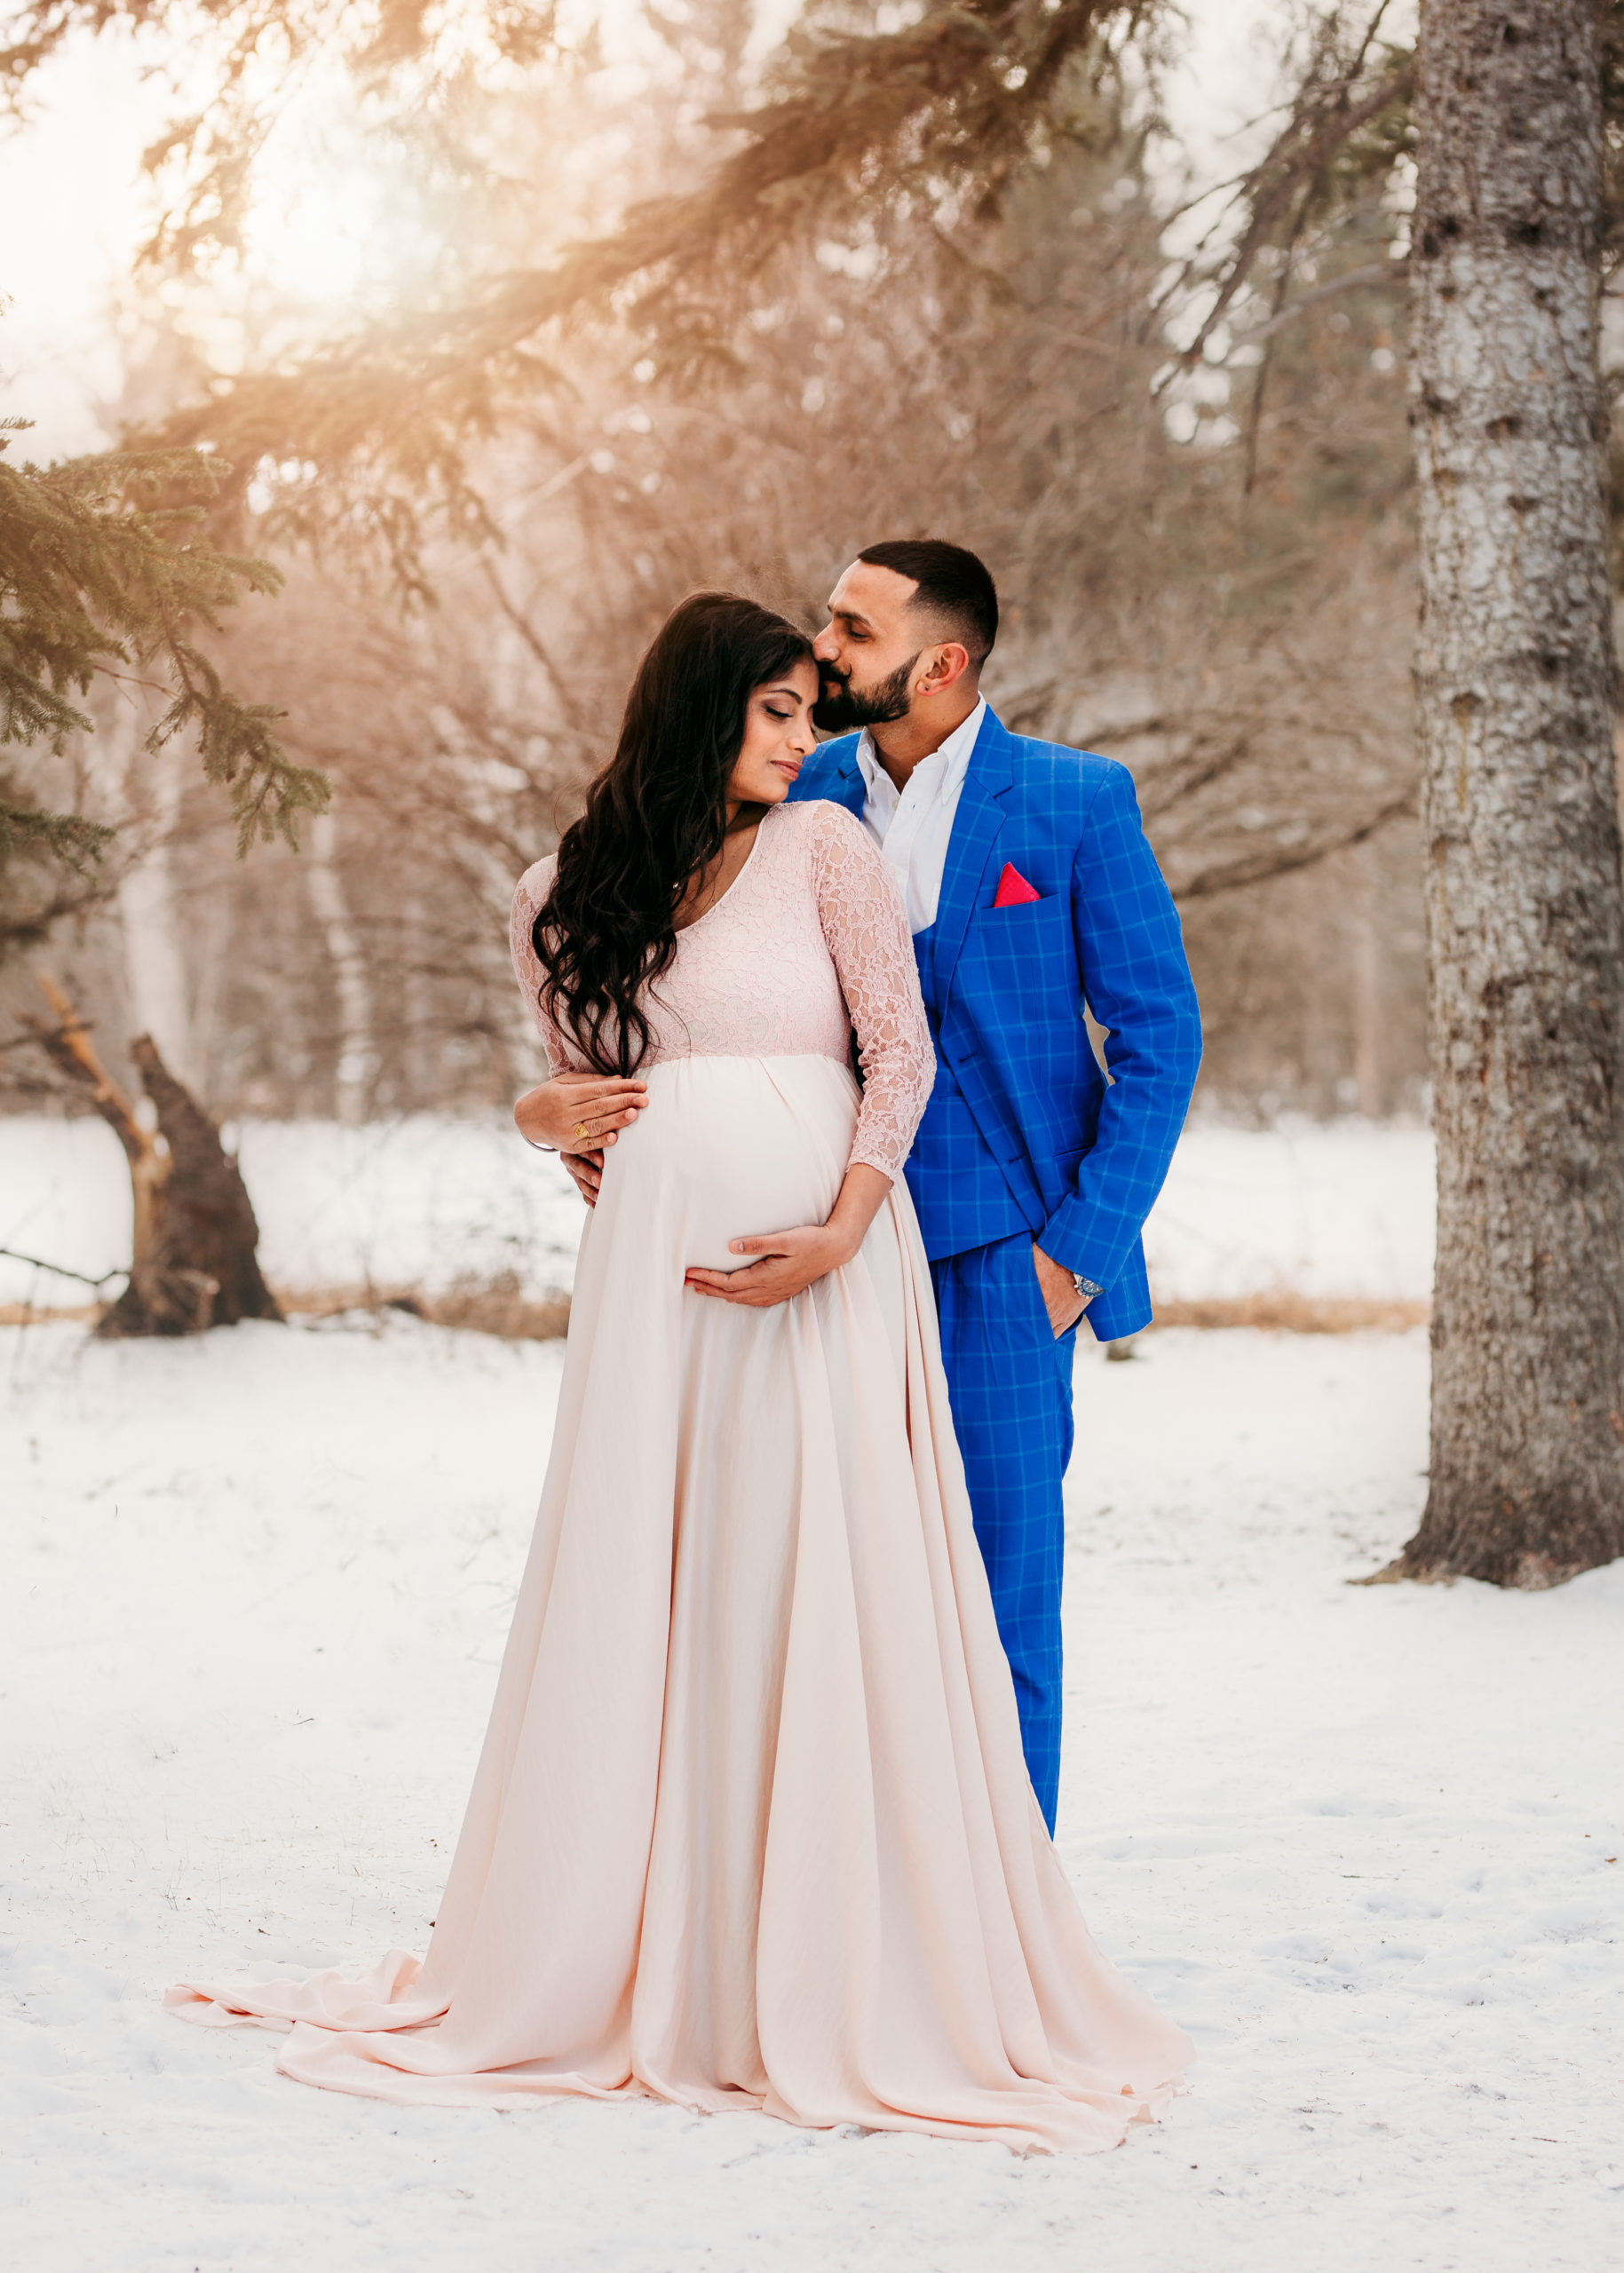 Pregnant couple cuddling outside in the winter, photography by Belliam Photos